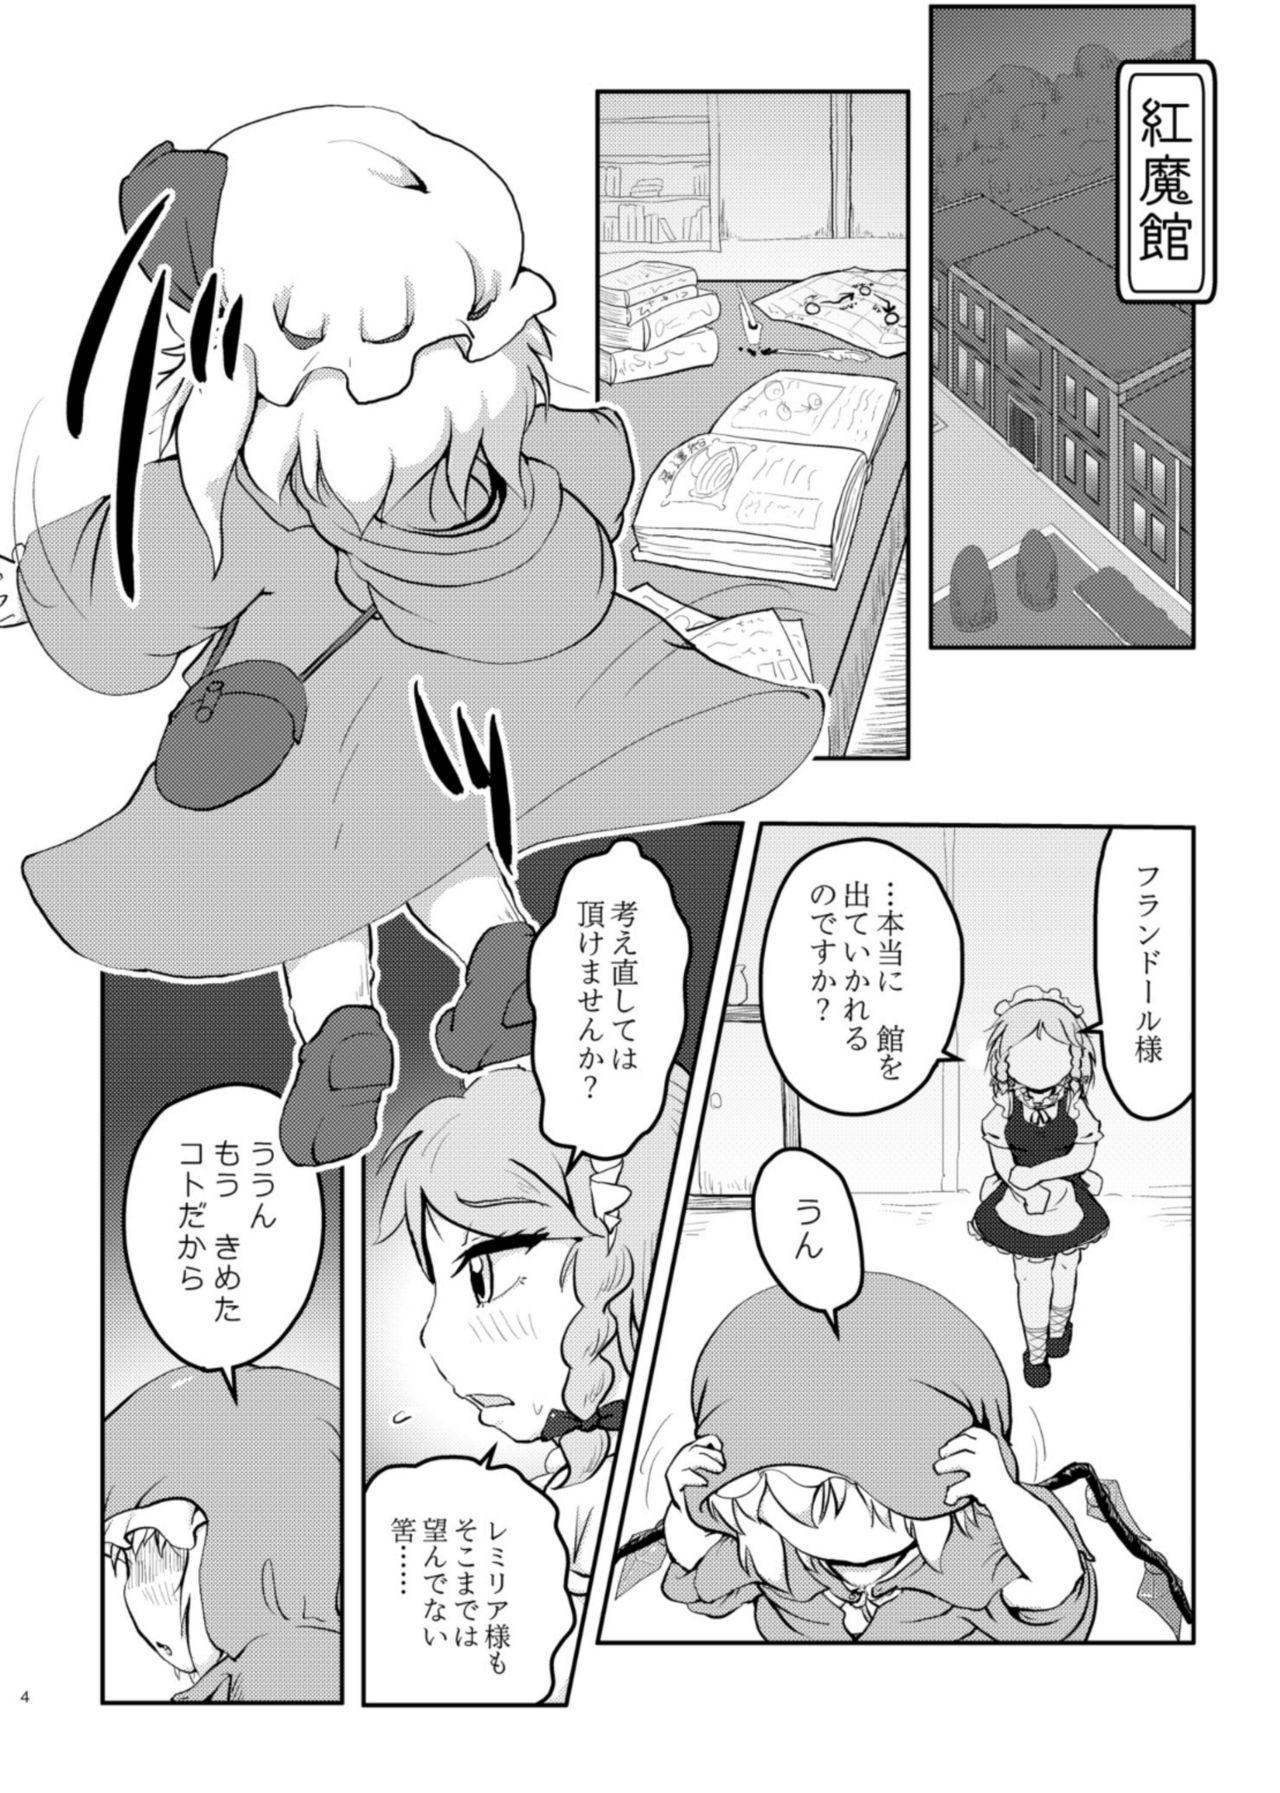 Sloppy Blowjob Scarlet Conflict 2 - Touhou project She - Page 4